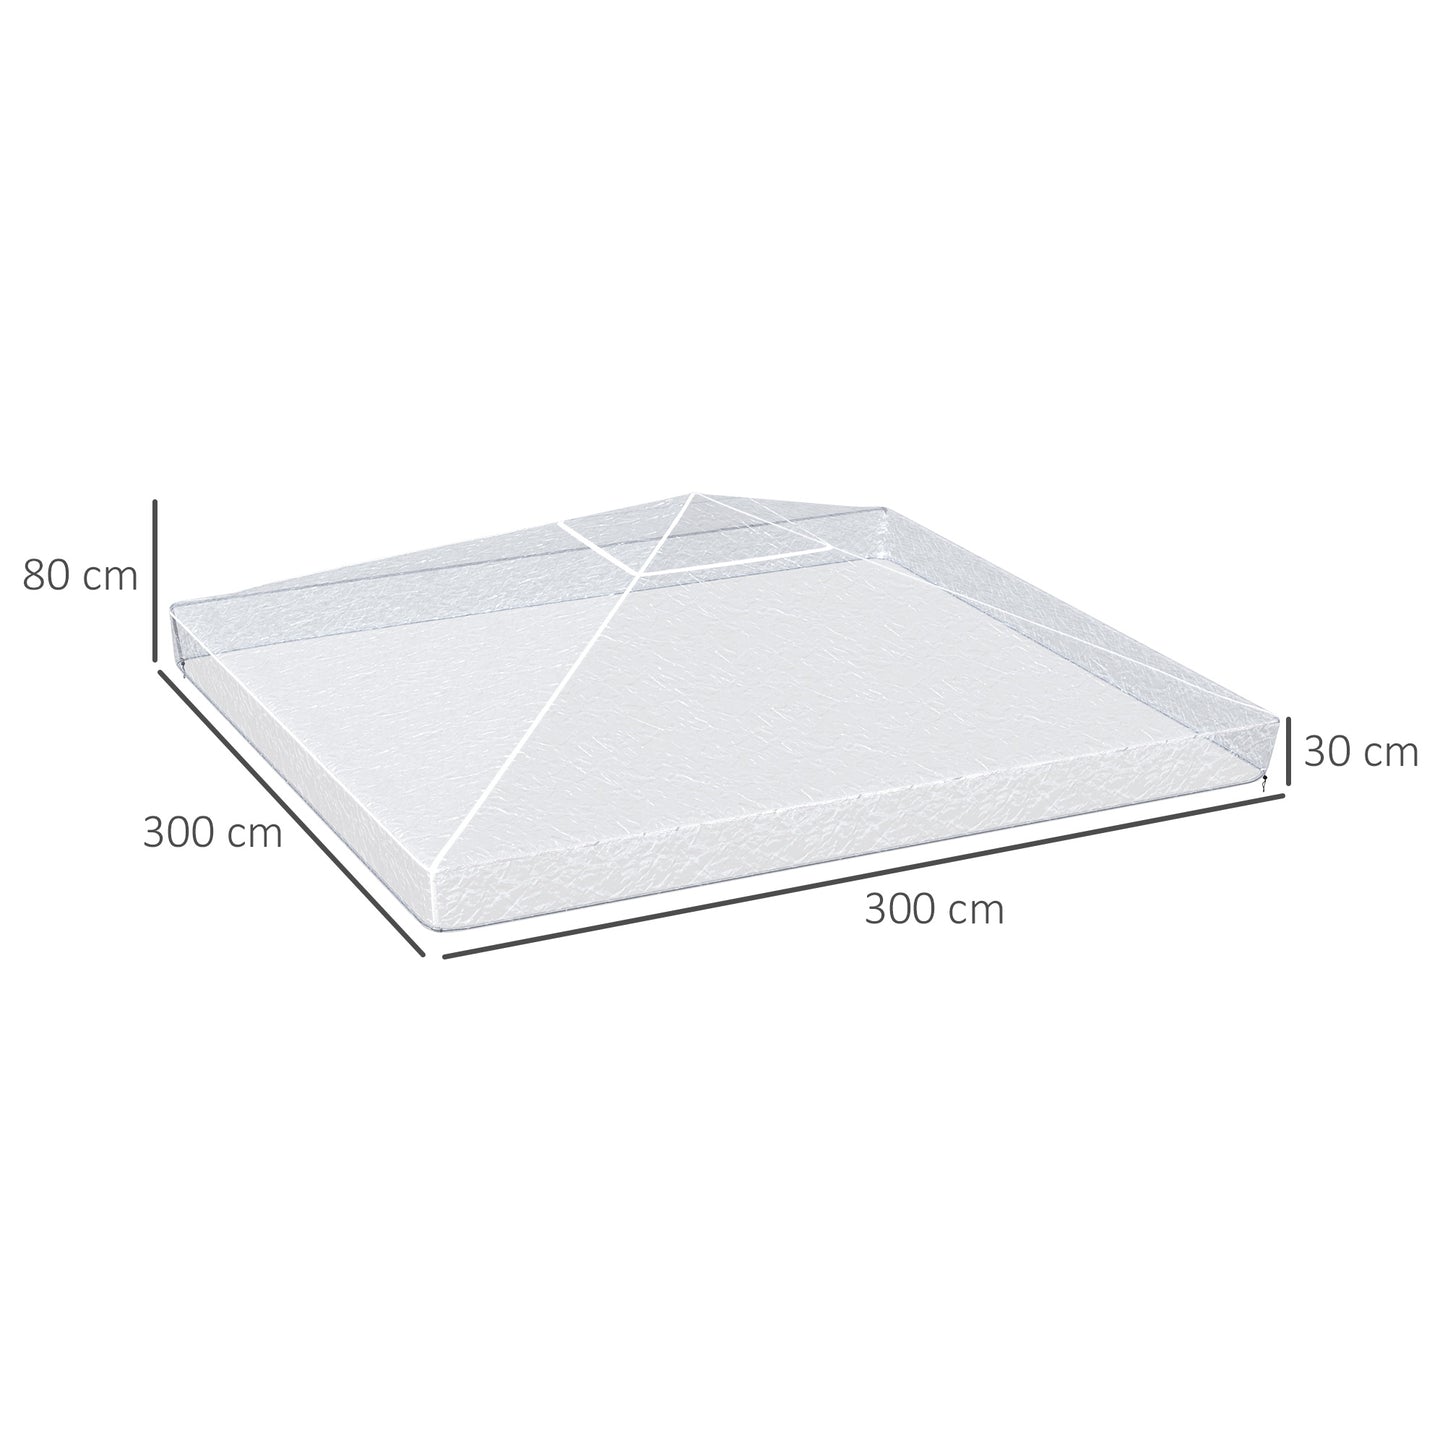 Outsunny 3 x 3 (m) Gazebo Protective Cover, Waterproof Cover for Gazebo, Canopy, and Tent